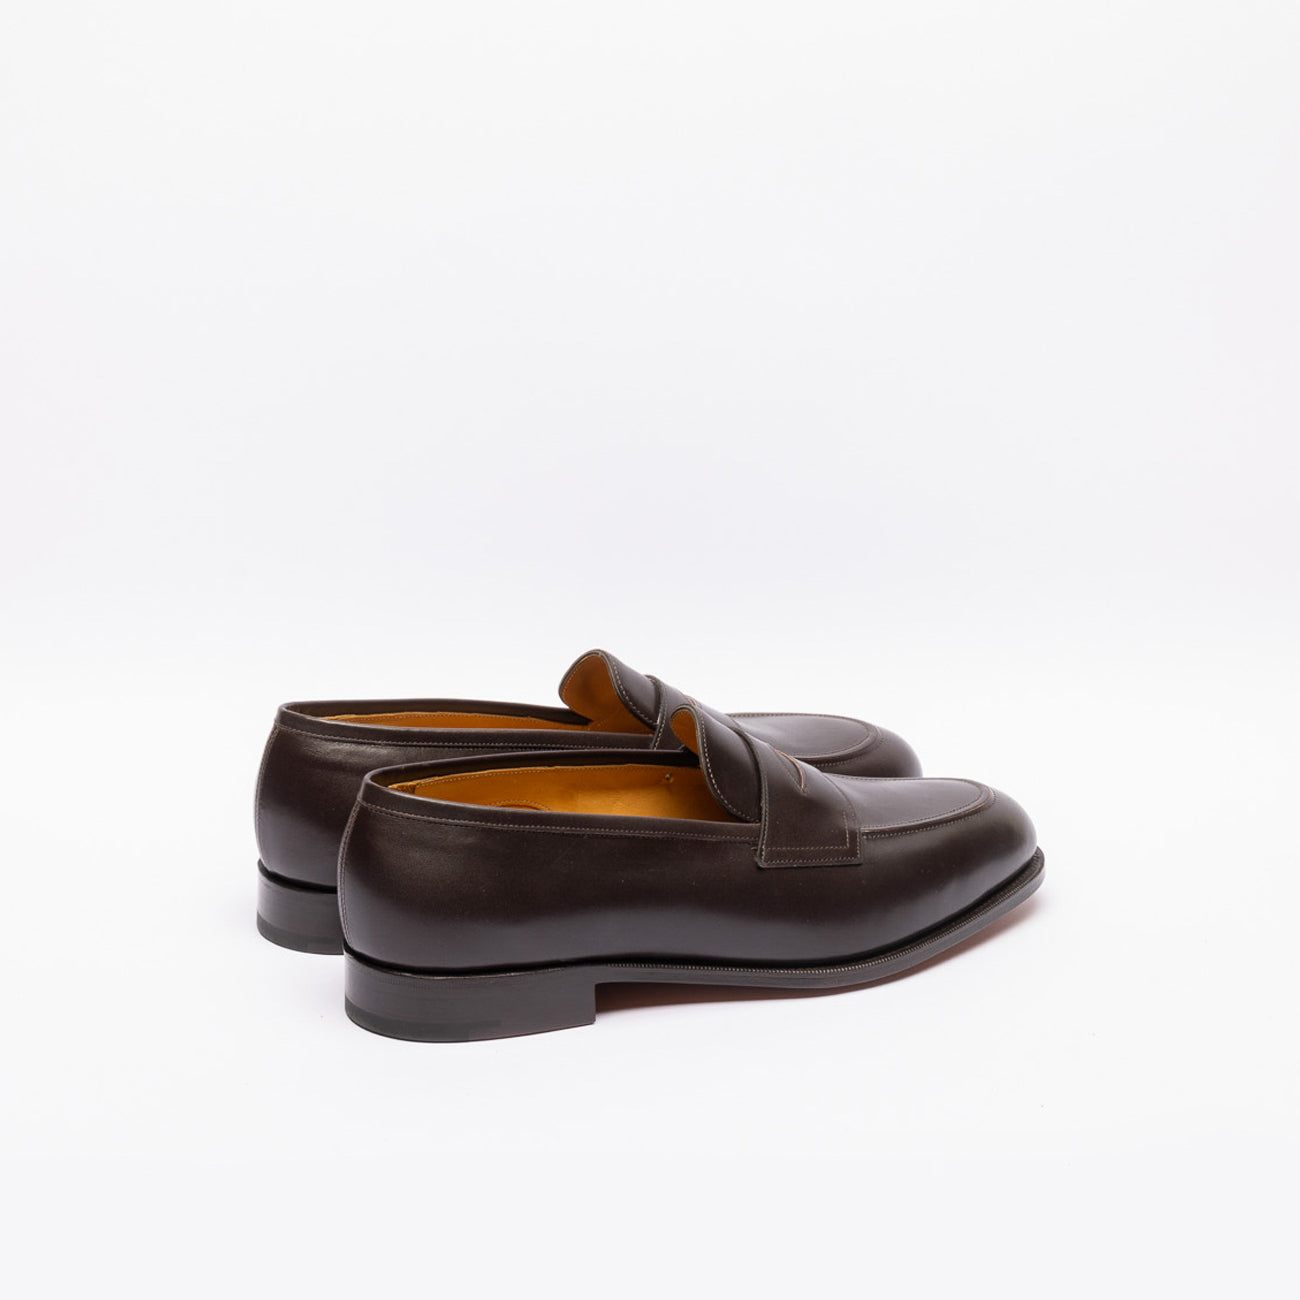 Edward Green Piccadilly penny loafers in brown leather (Espresso calf)